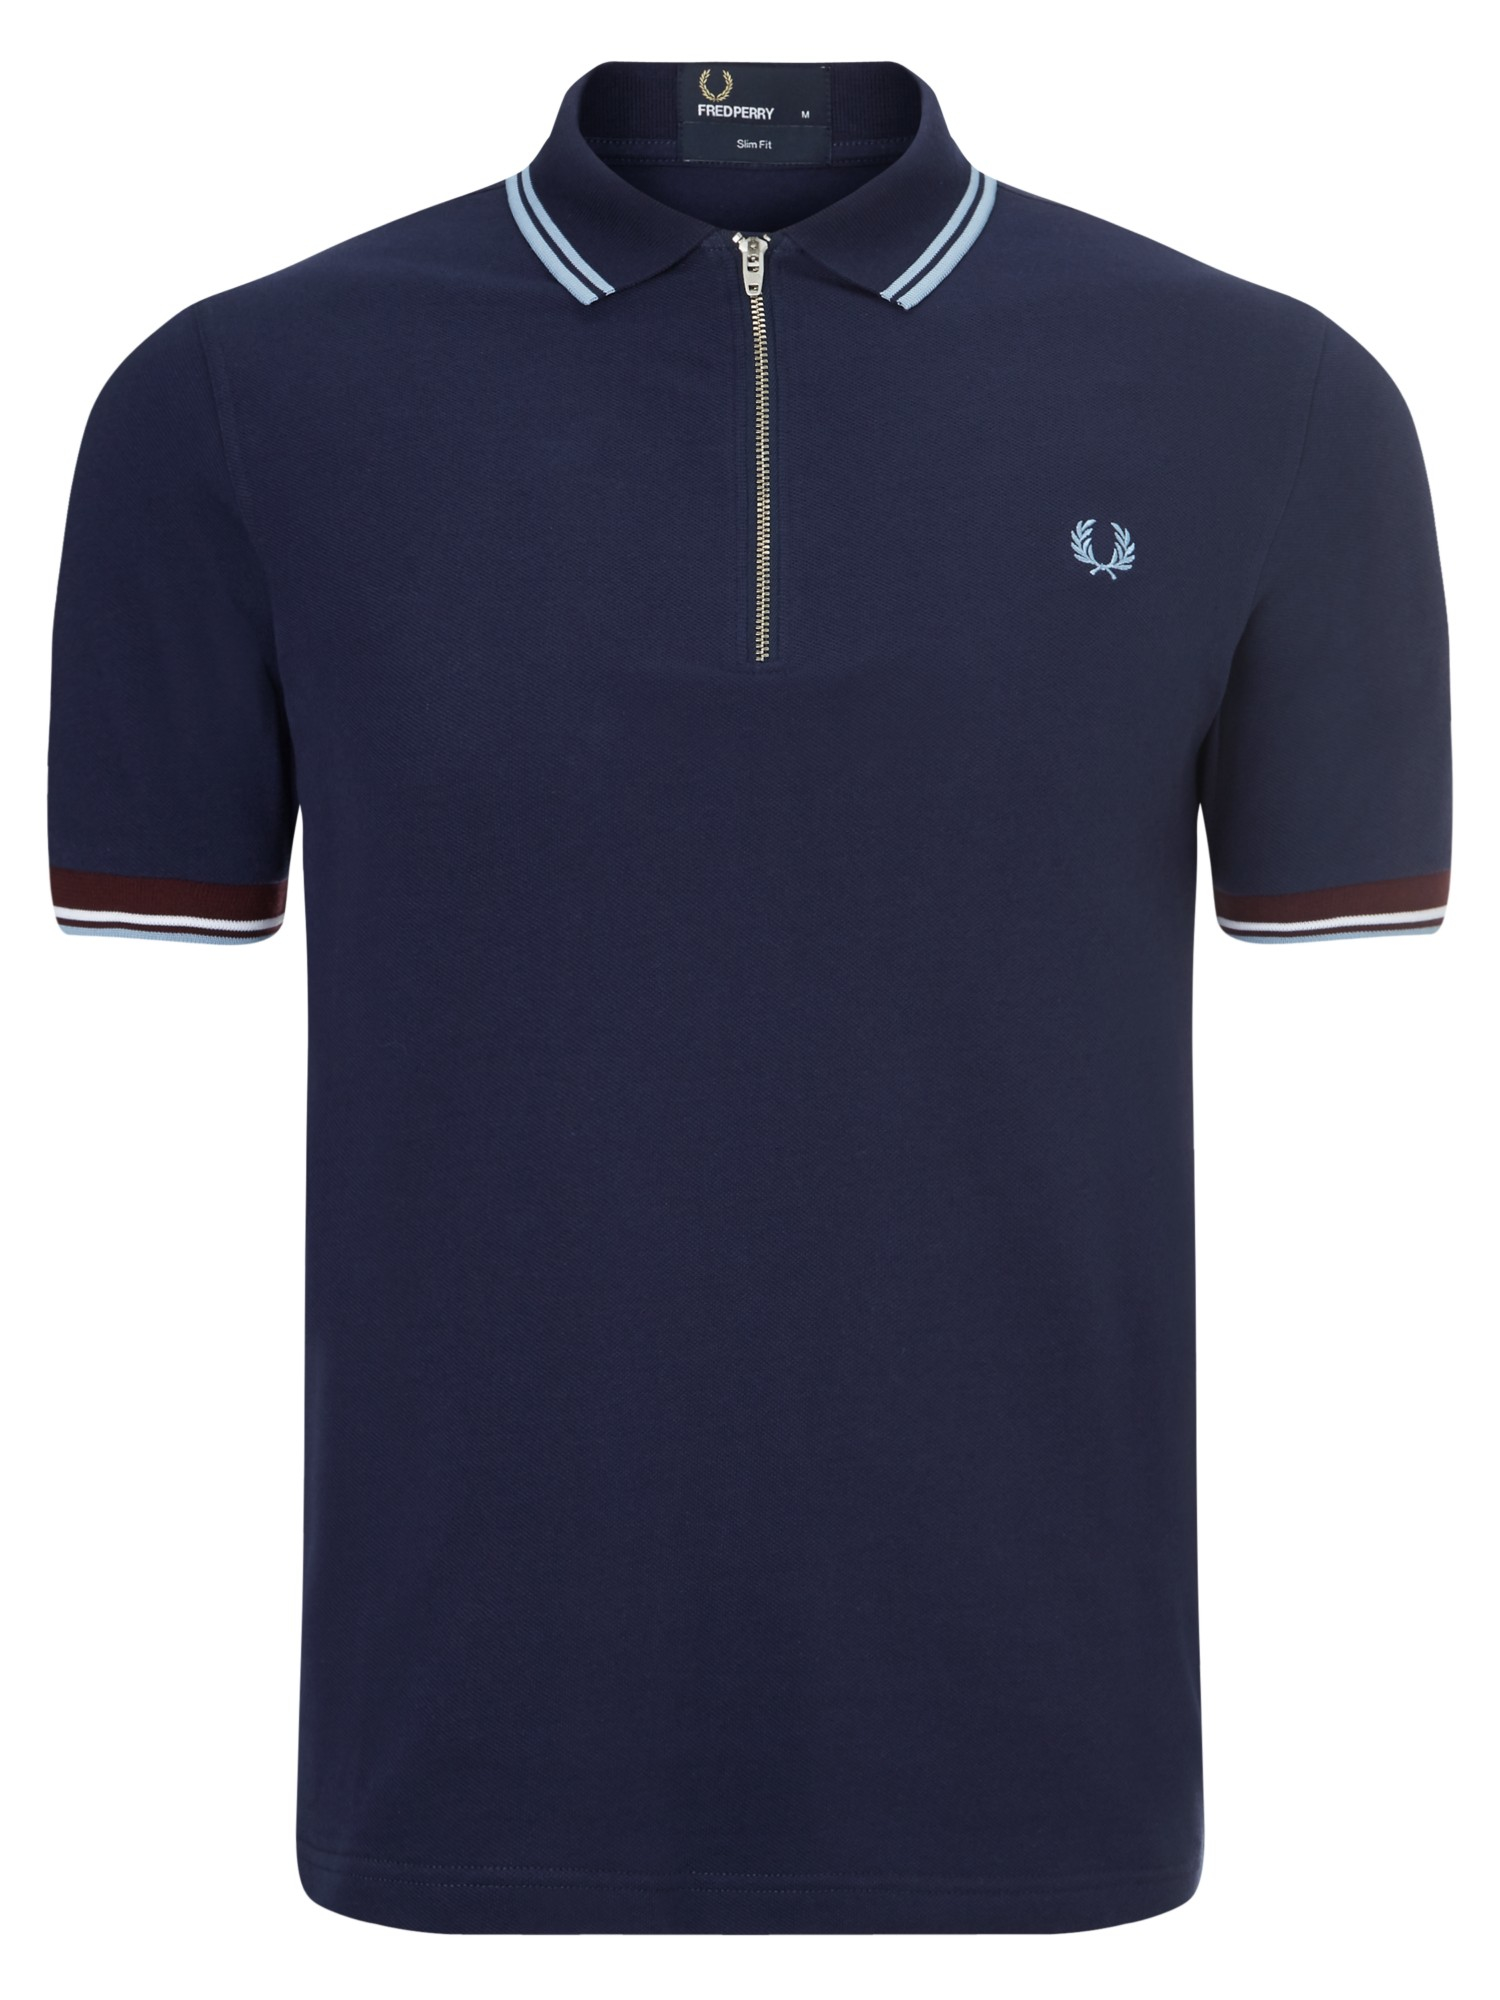 Fred Perry Twin Tip Zip Polo Shirt in Carbon (Blue) for Men - Lyst